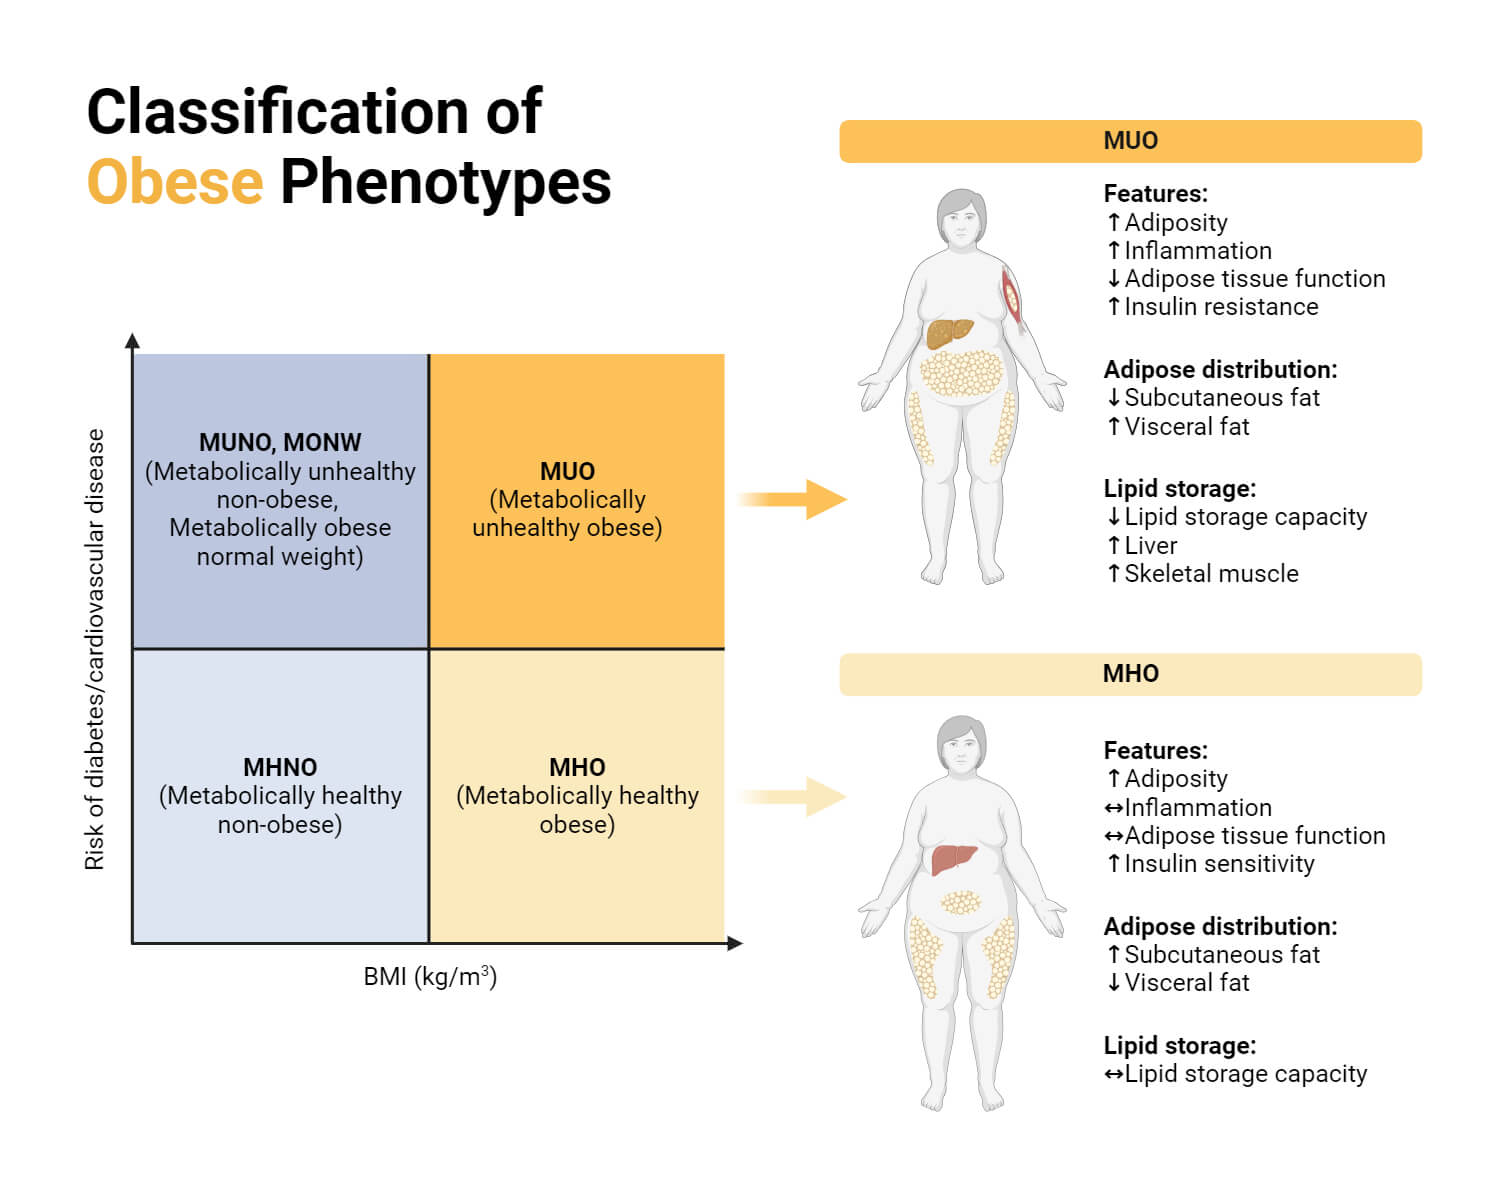 Classification of Obese Phenotypes